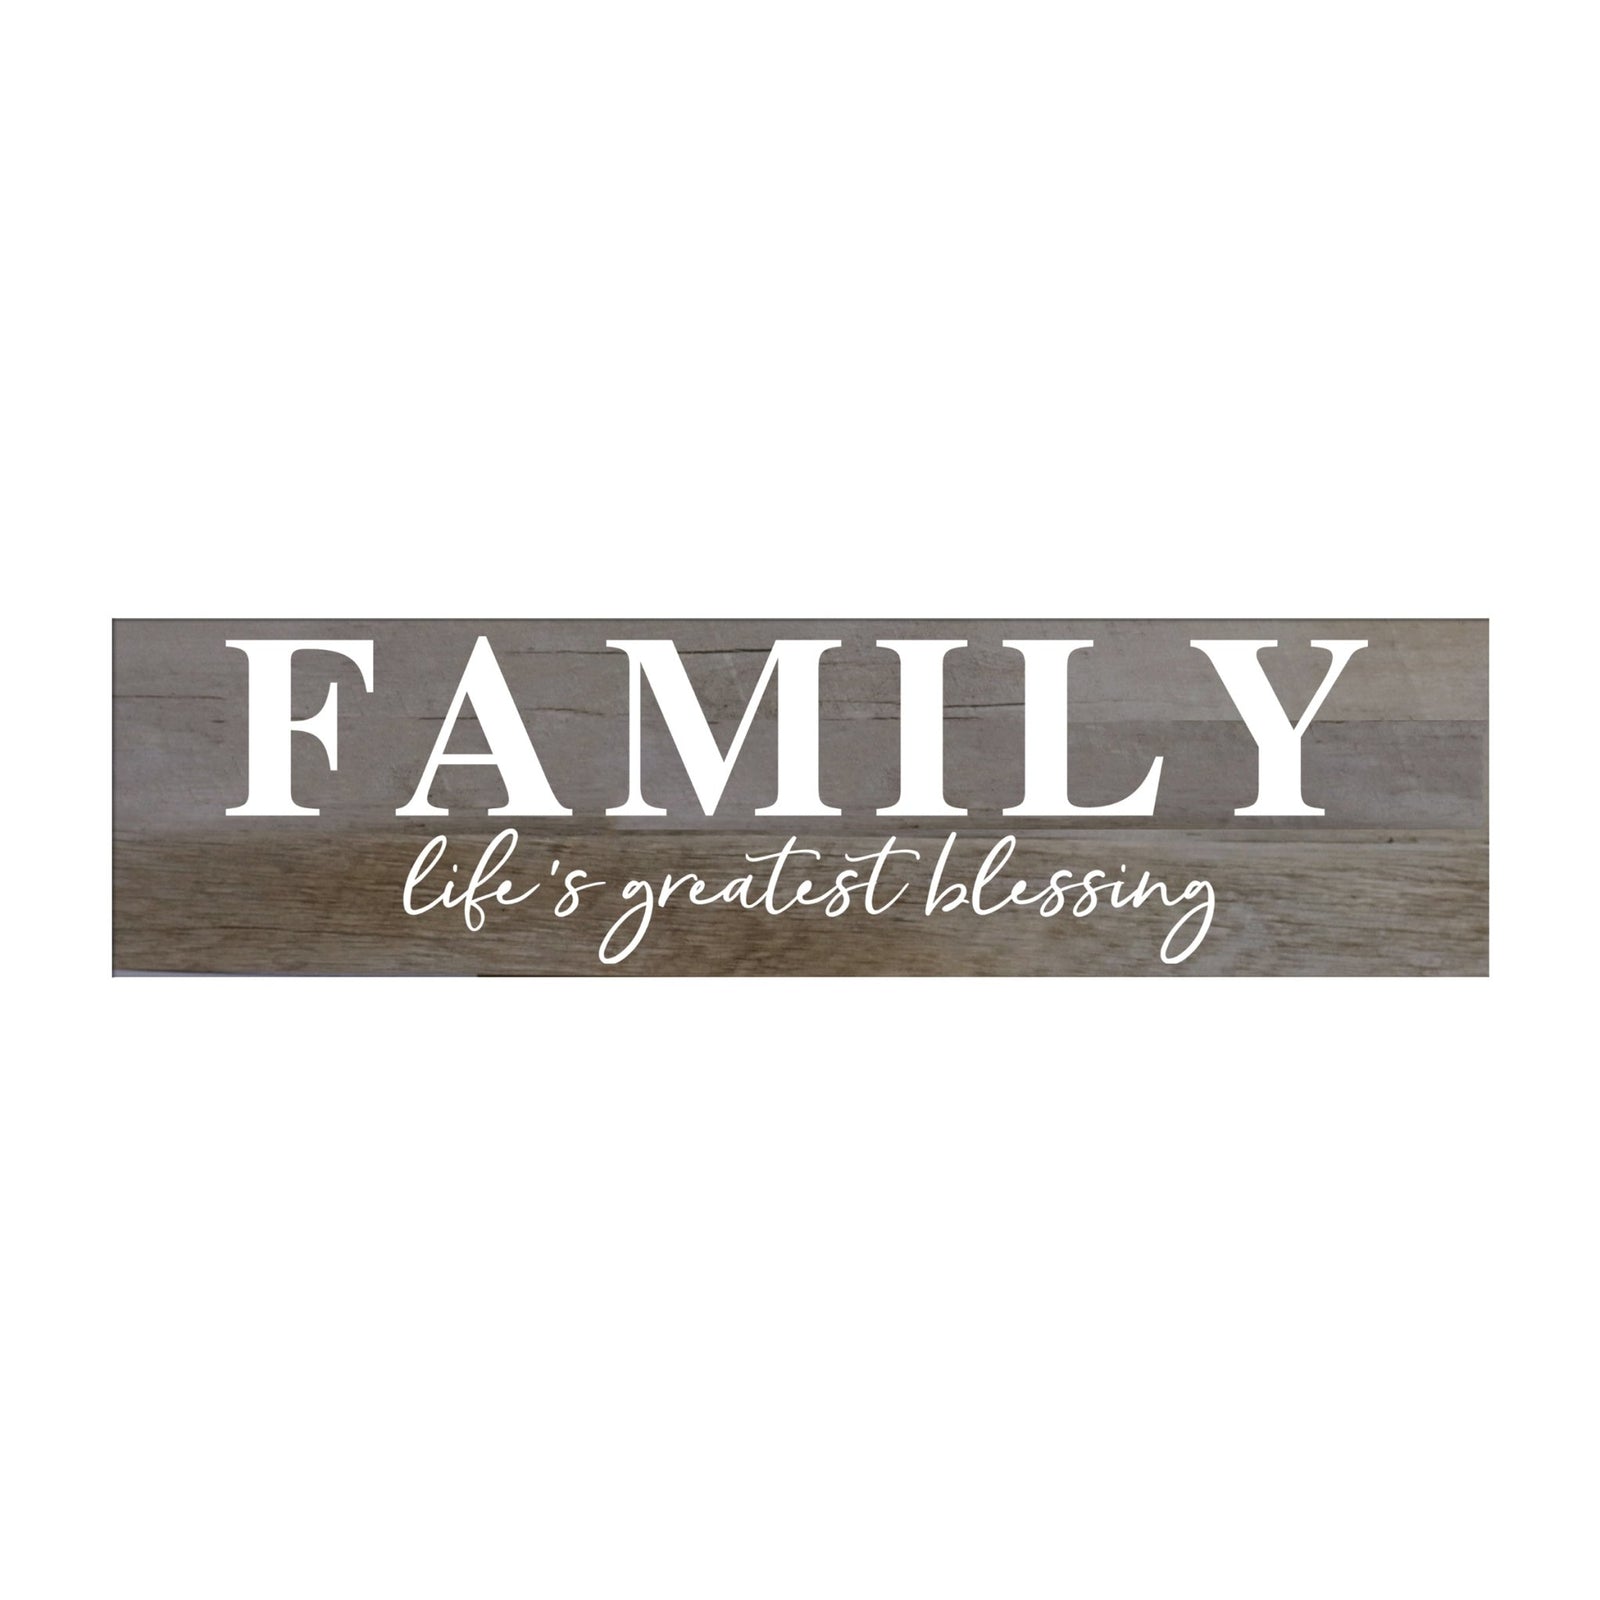 Inspirational Everyday Home and Family Wooden Wall Art Hanging Plaque 10 x 40 – Family Life's Greatest Blessing - LifeSong Milestones